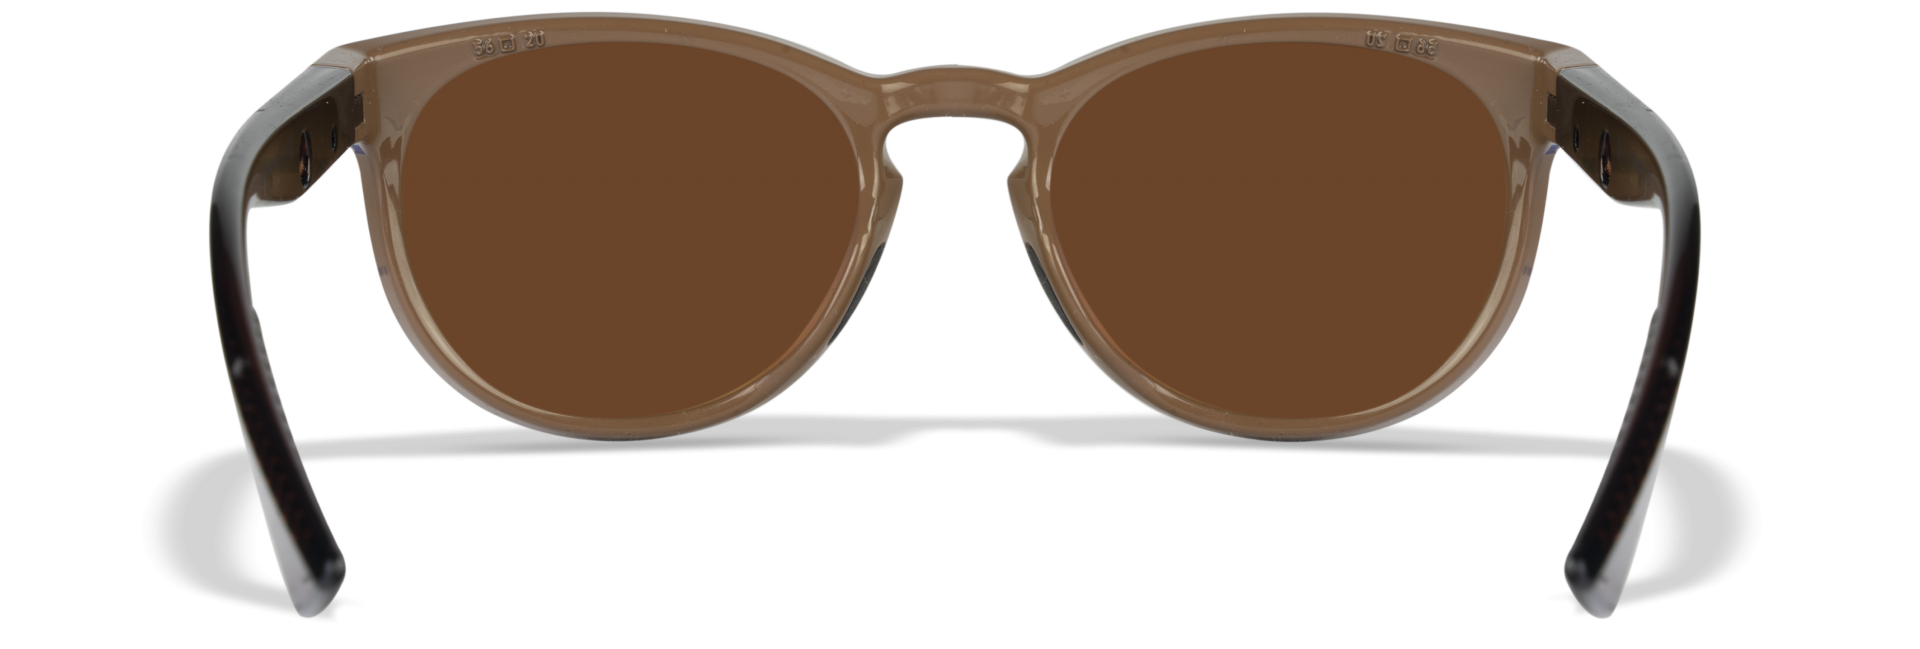 WileyX COVERT Captivate Polarized Copper Gloss Coffee/Crystal Brown Frame